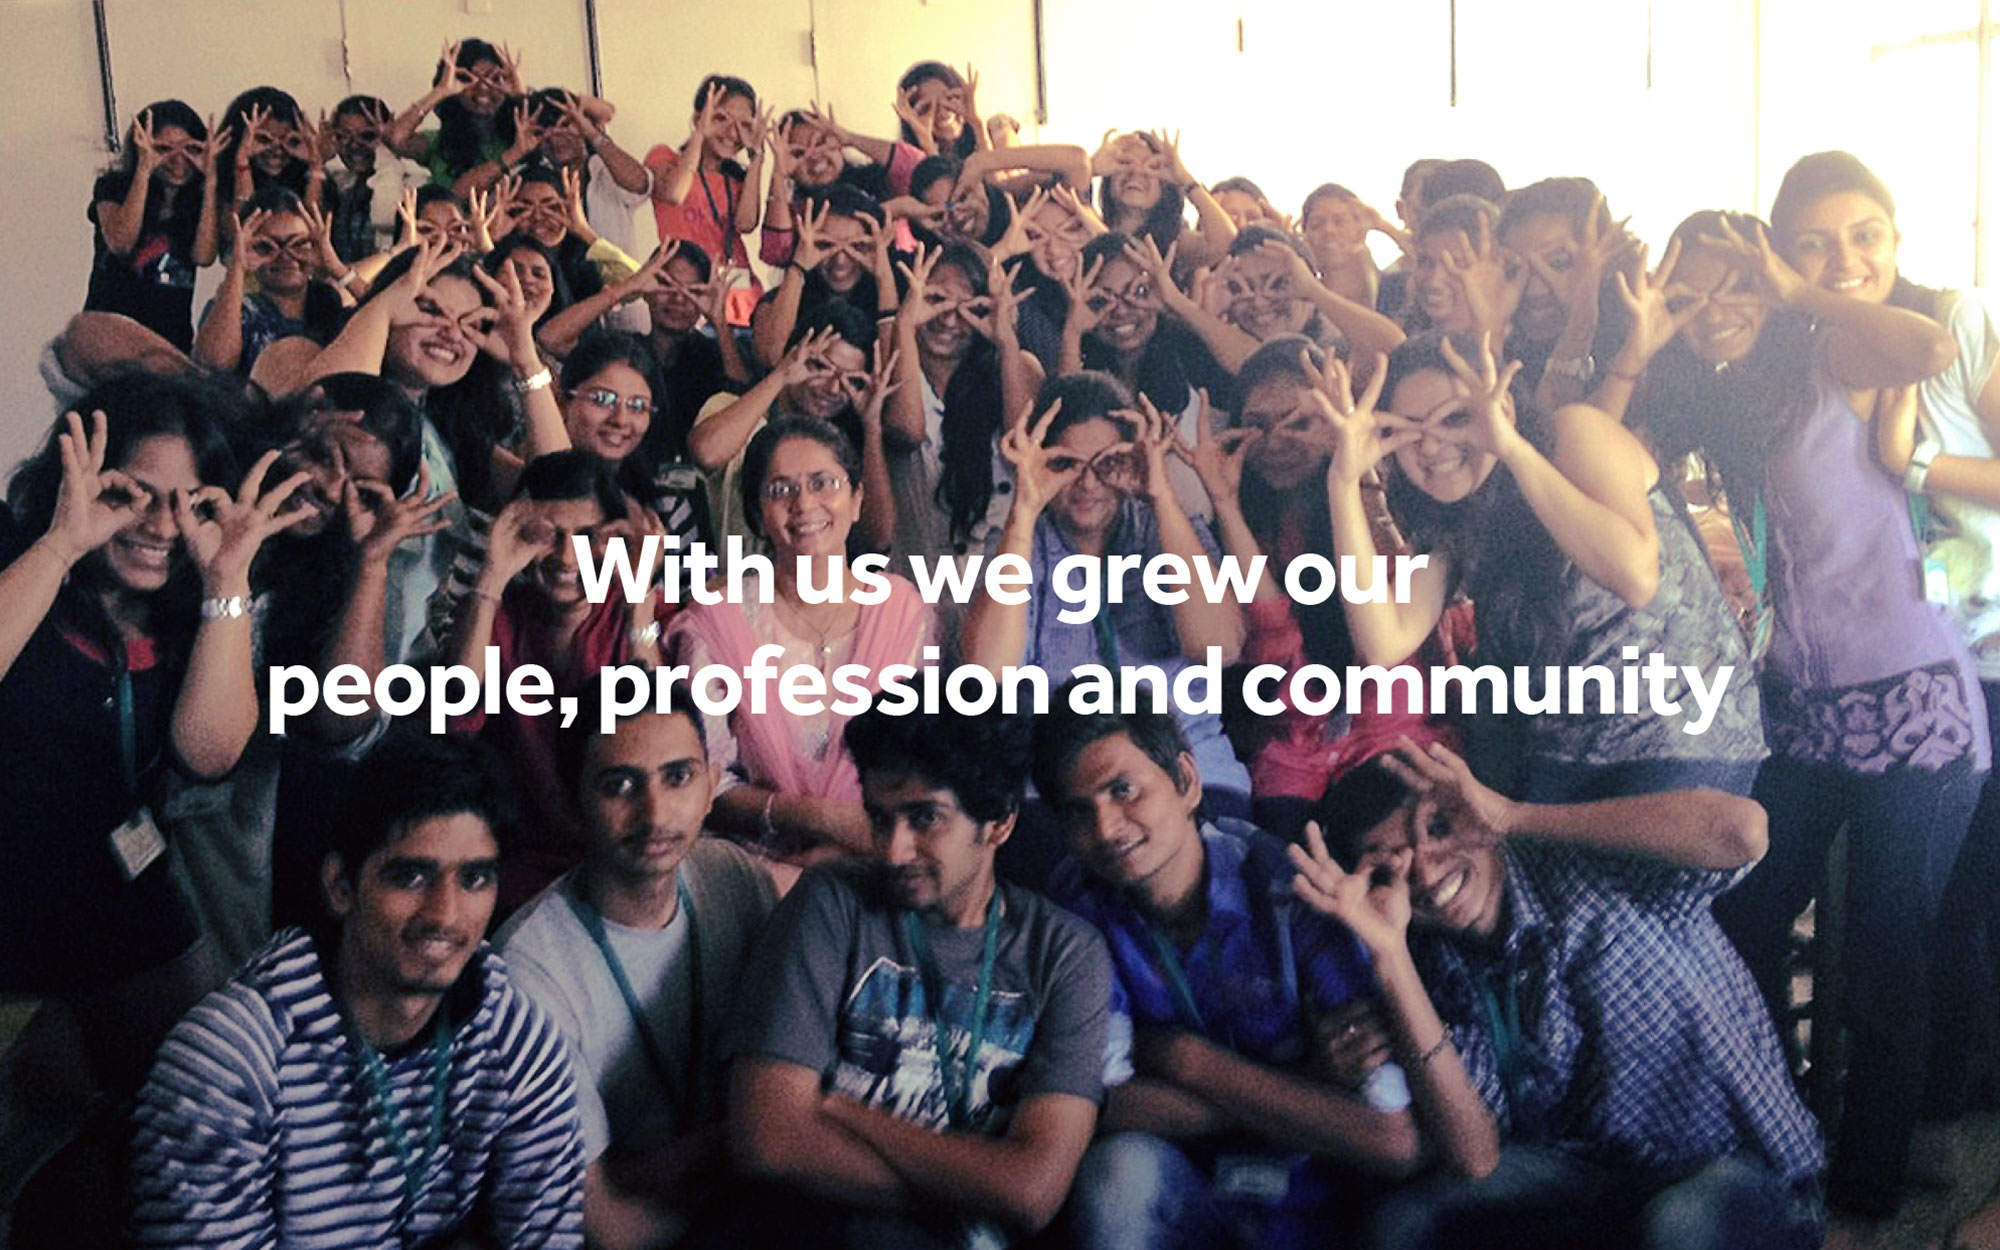 With us we grew our people, profession and community